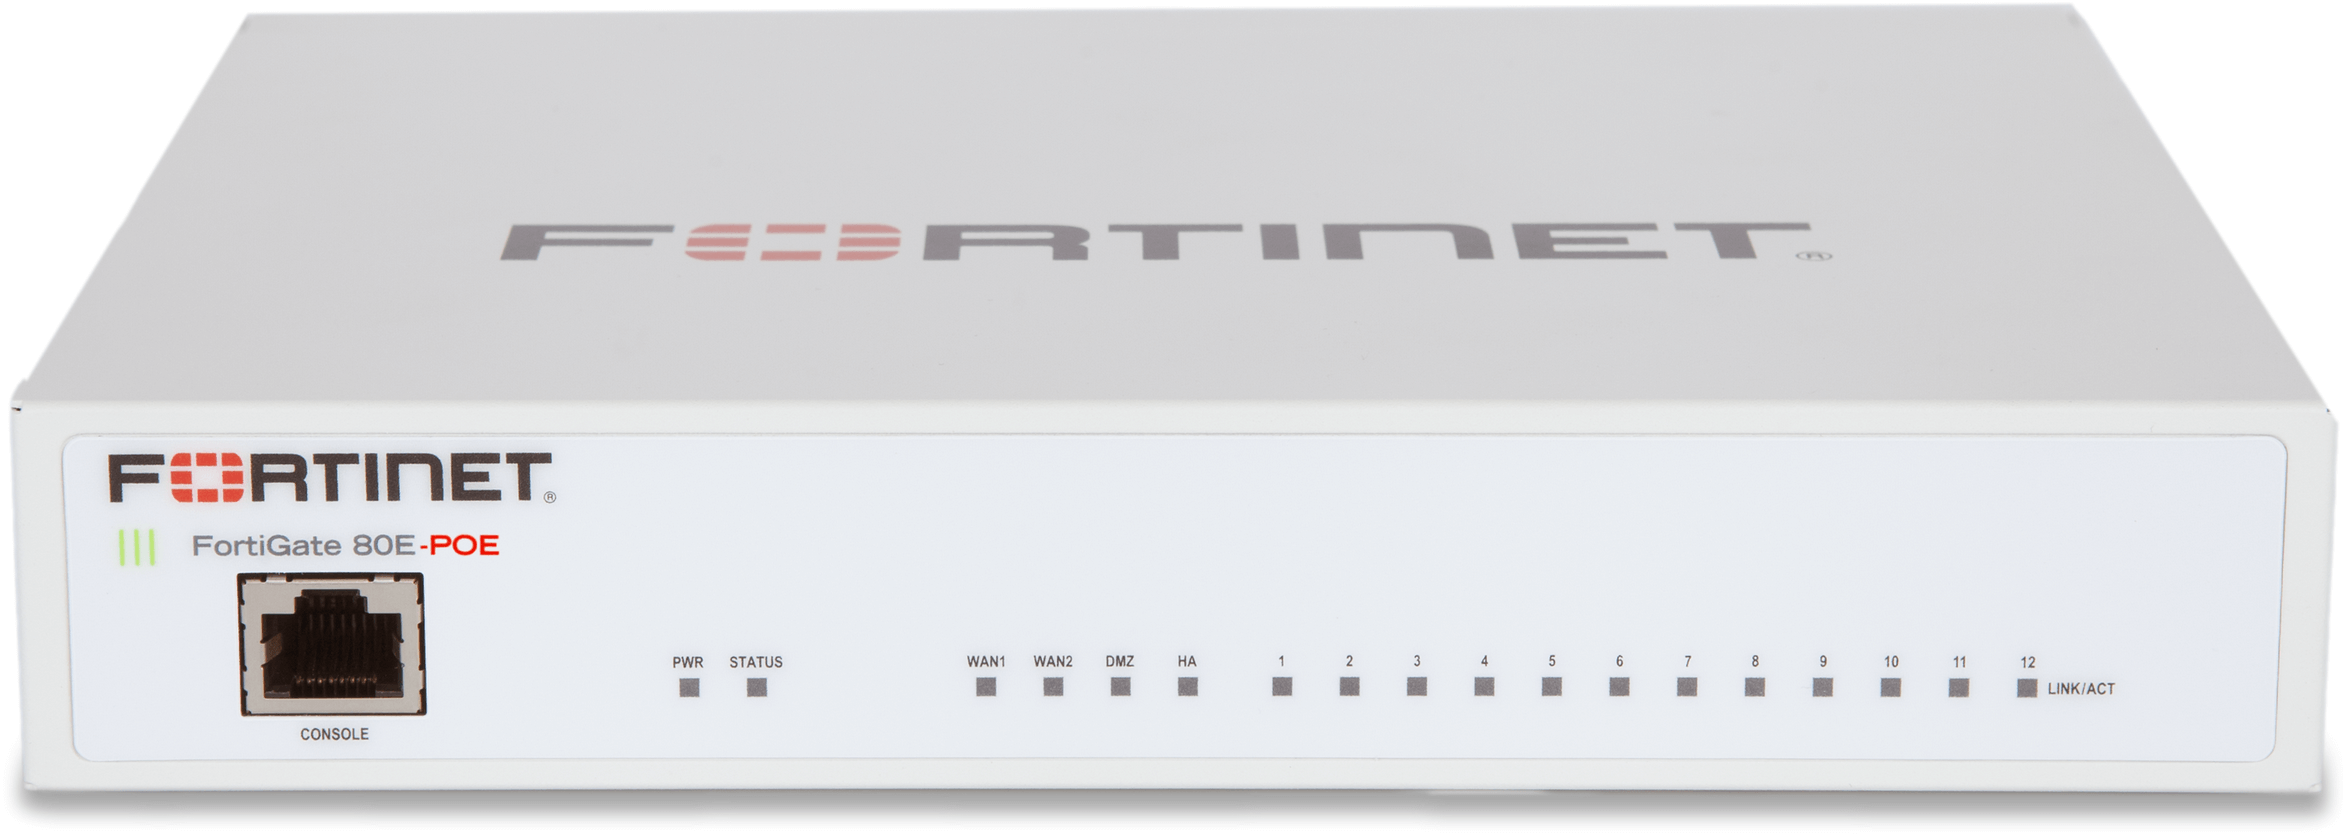 Fortinet FortiGate 80E POE Firewall (End of Sale/Life)